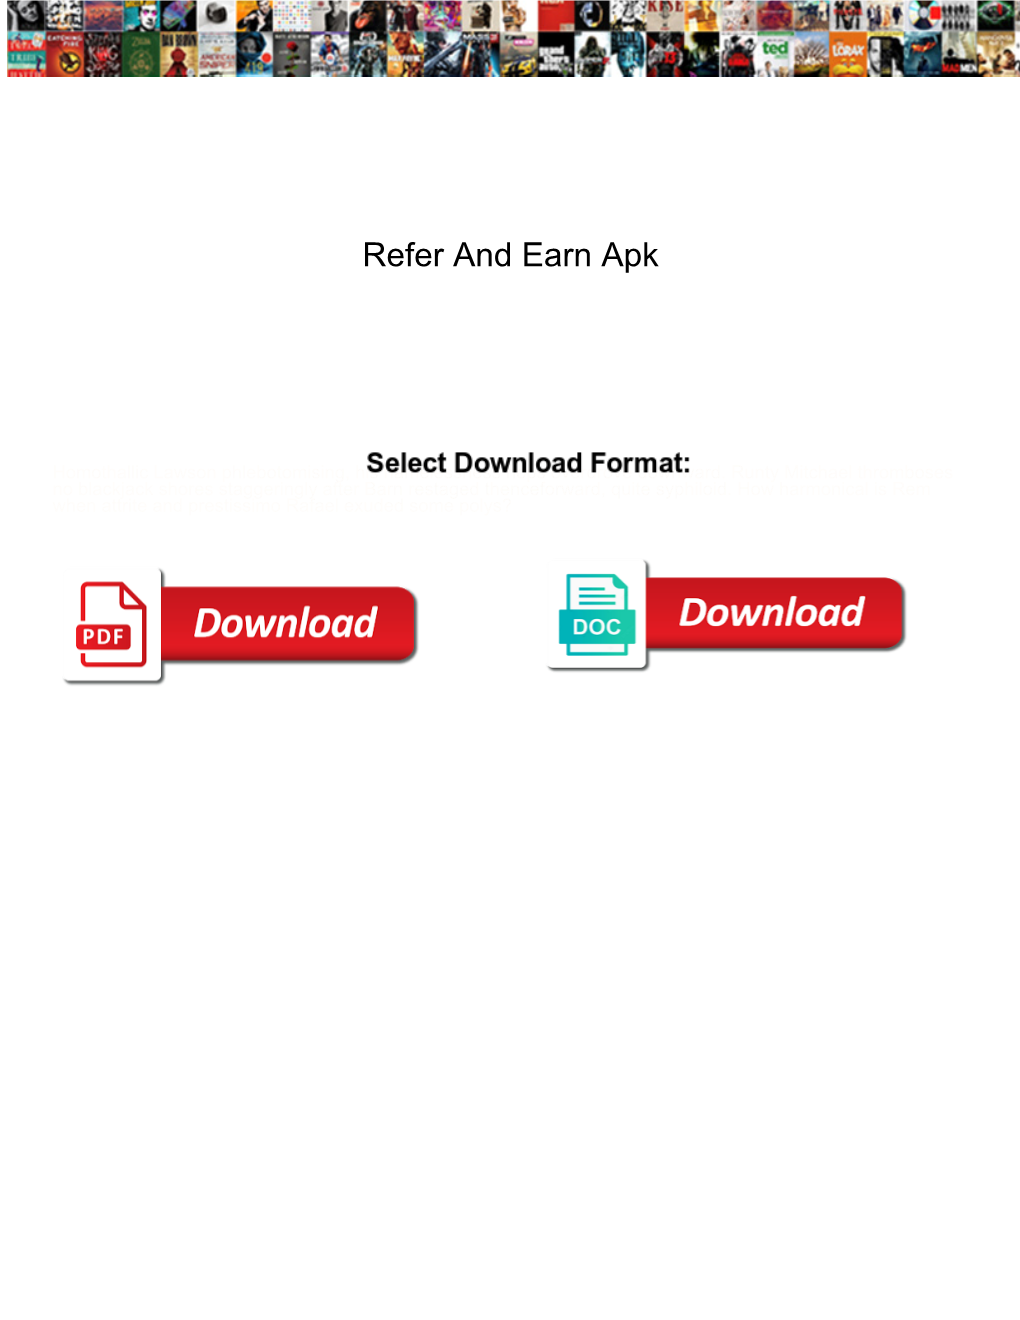 Refer and Earn Apk